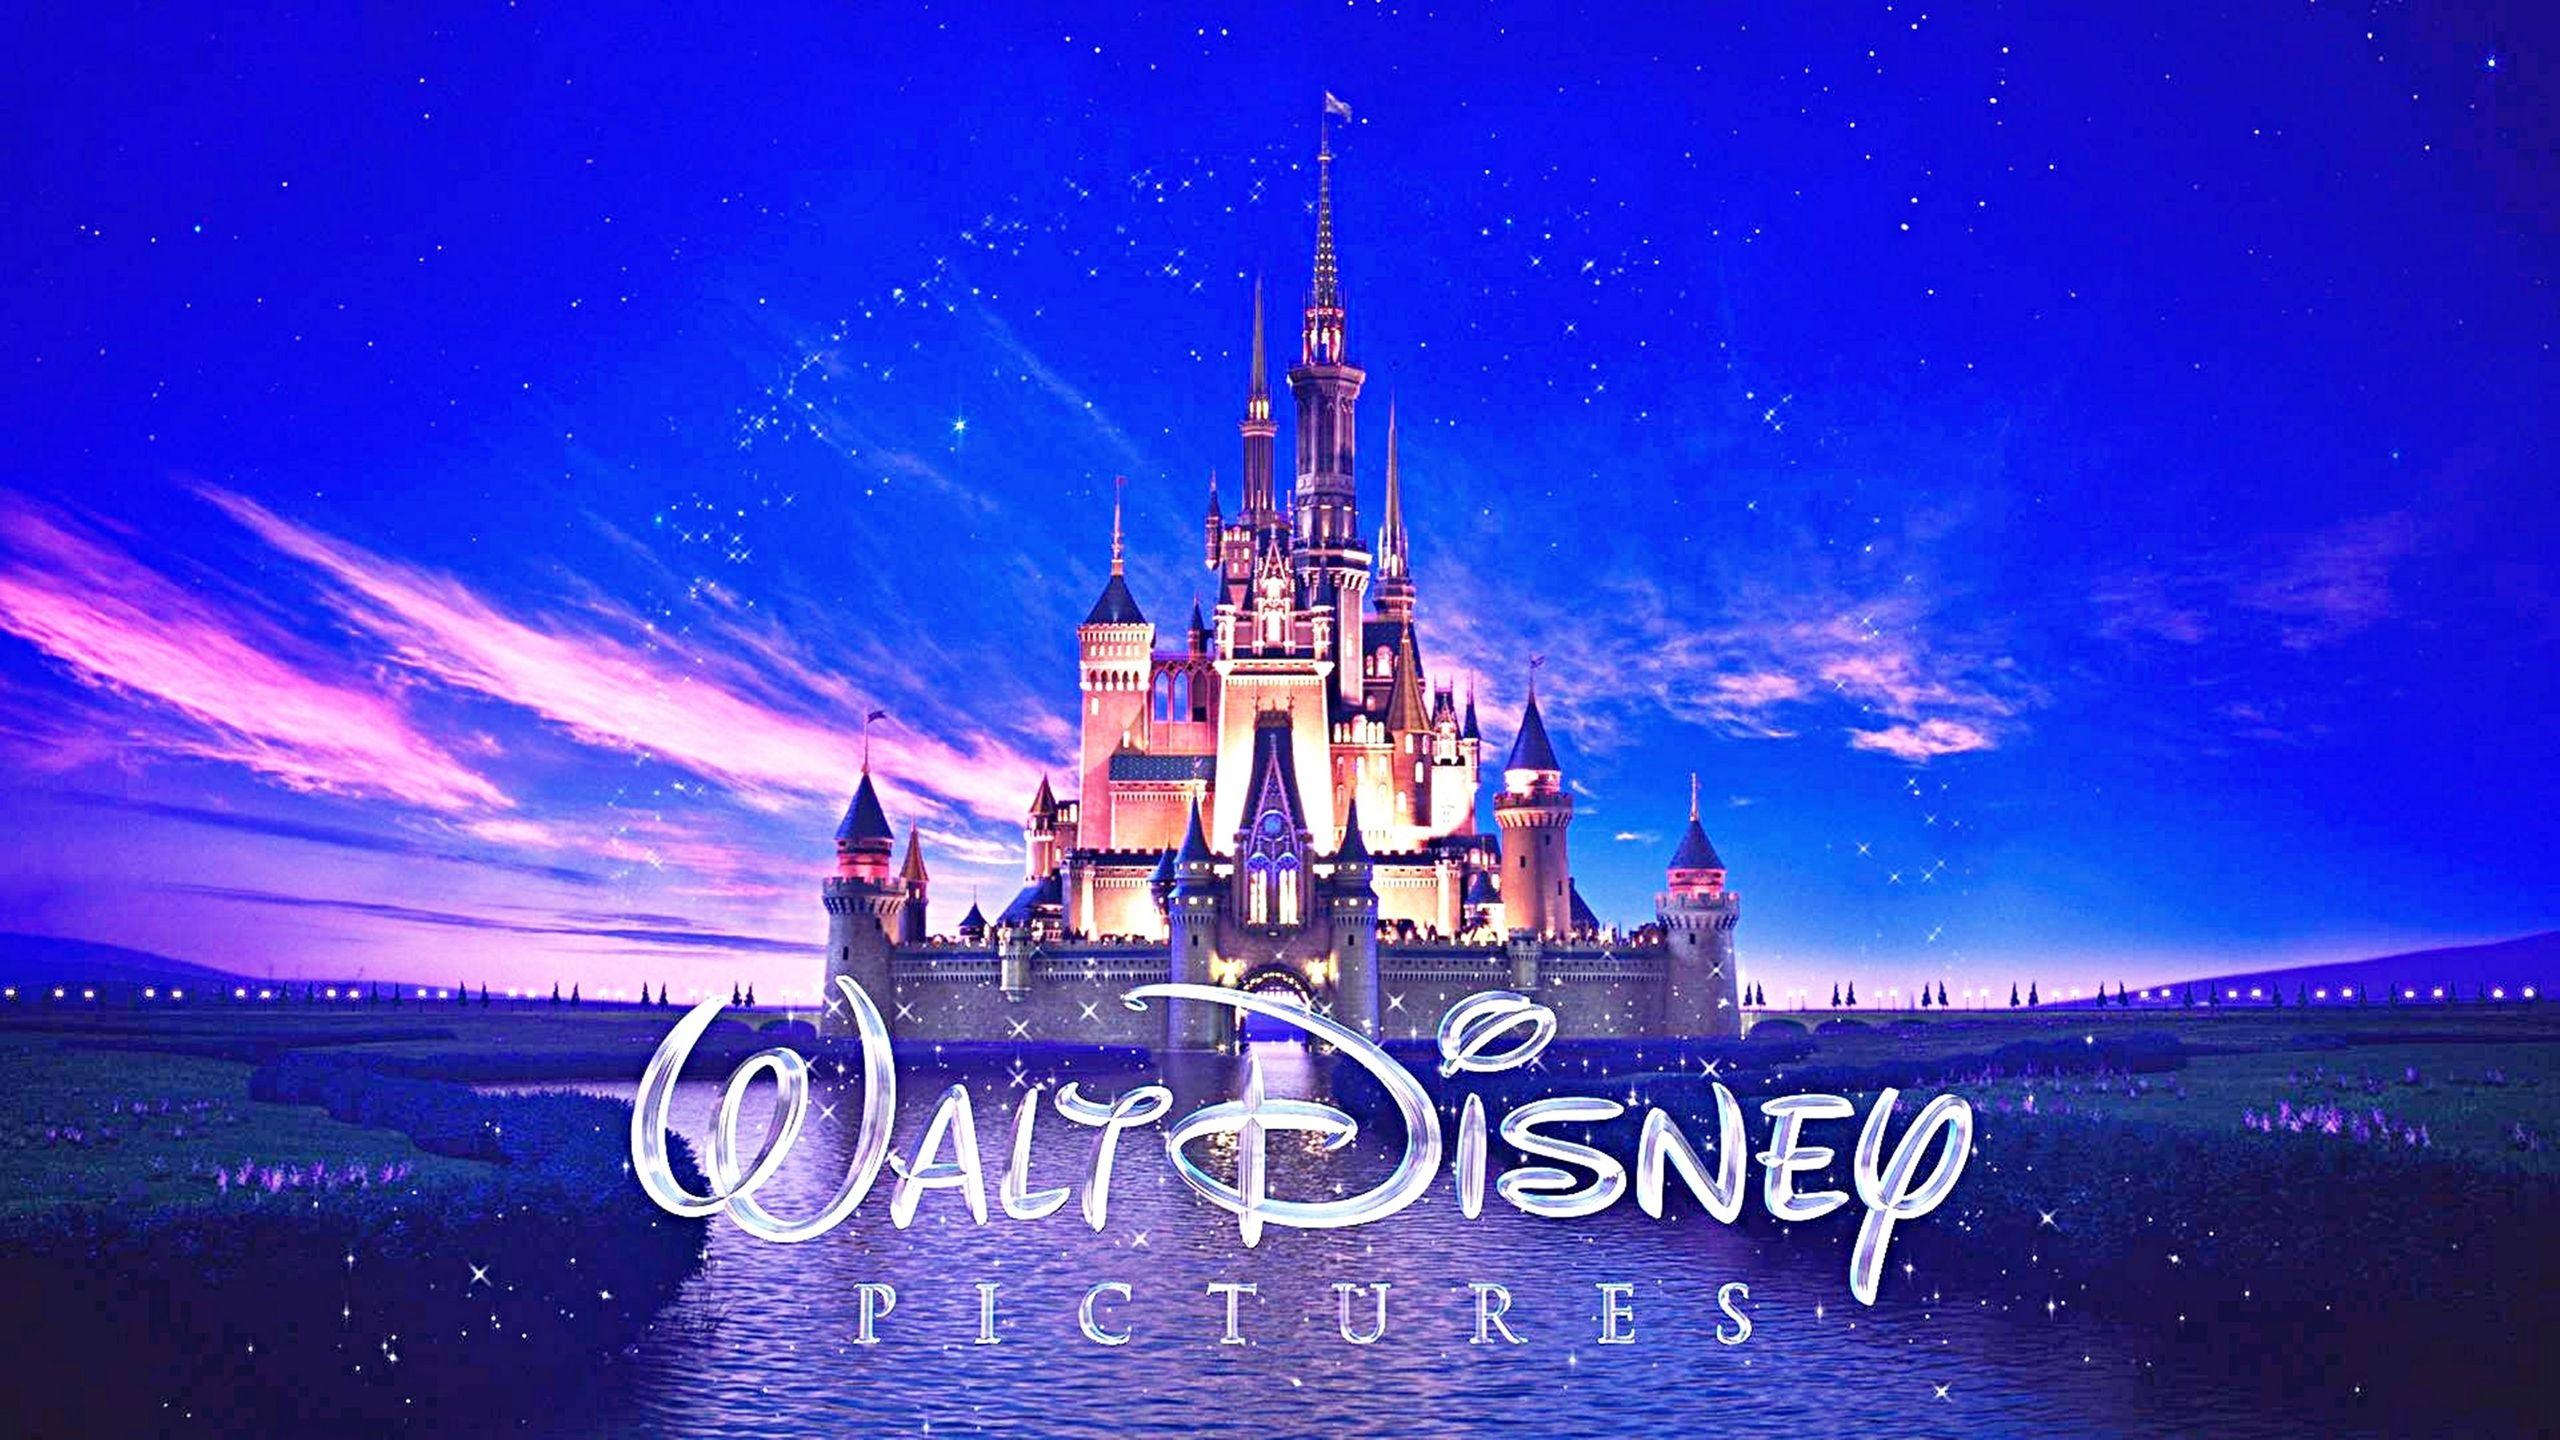 Disney Films Logo - 8 Disney and Pixar Animated Films to be Released From 2016 to 2018 ...